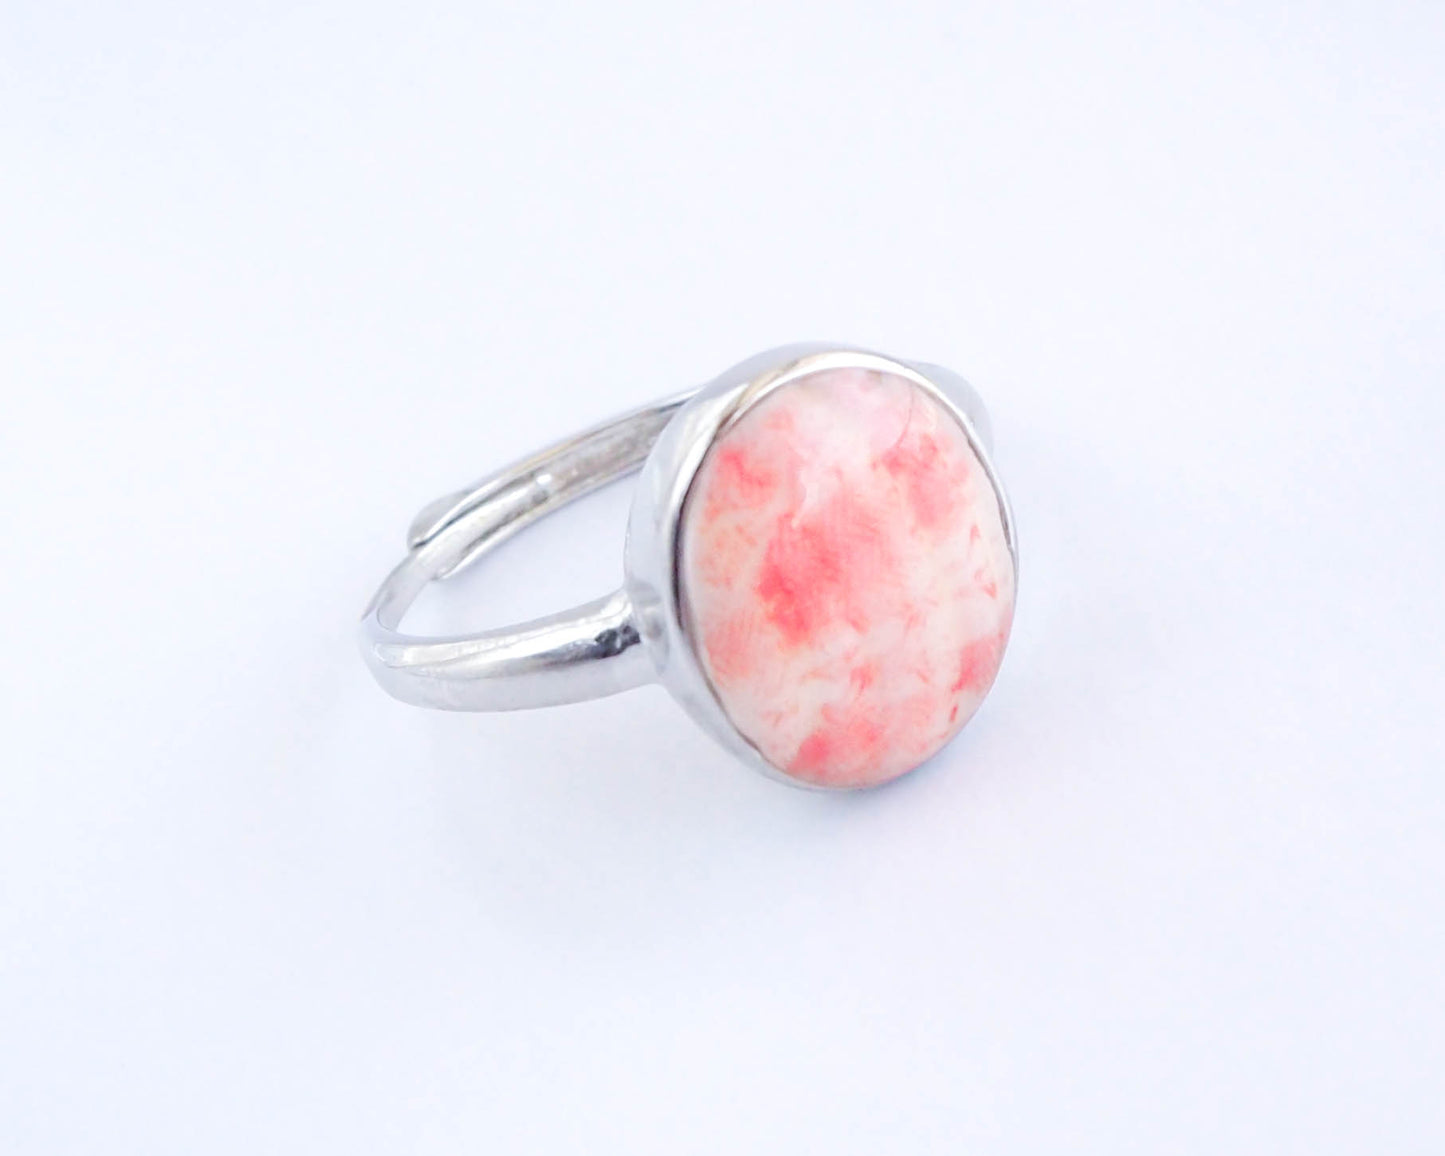 Details of Pink Venus Shell Ring, adjustable 925 Silver Ring, Real Seashell ring, Shell from Portugal, Coastal Gift